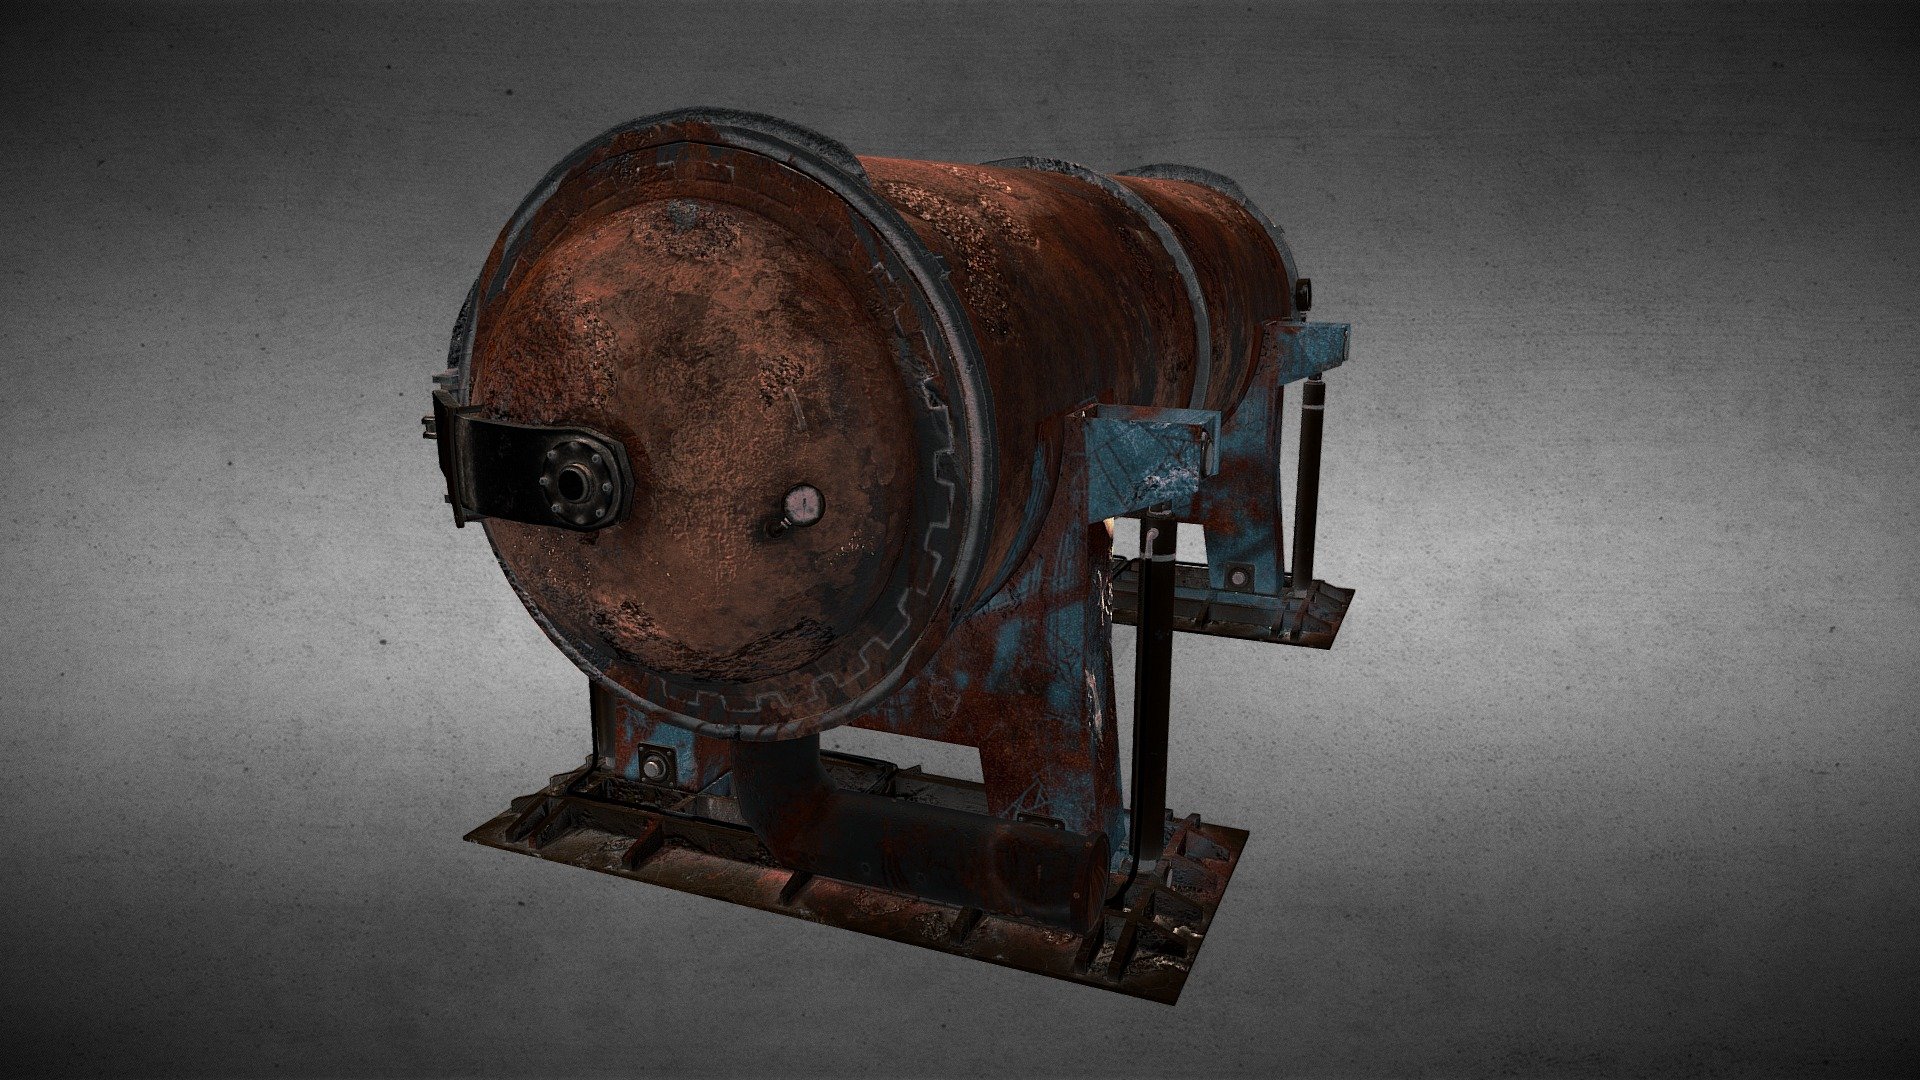 Instagram: https://www.instagram.com/arghanionspuzzlebox/
Youtube Channel: https://www.youtube.com/channel/UCZCYv7mrbixDNKMMRnQj36A

Industrial Water Tank - Rusted
PBR textured
4k - Rusted Industrial Water Tank - Download Free 3D model by Arghanion's PuzzleBox (@kain2008) 3d model